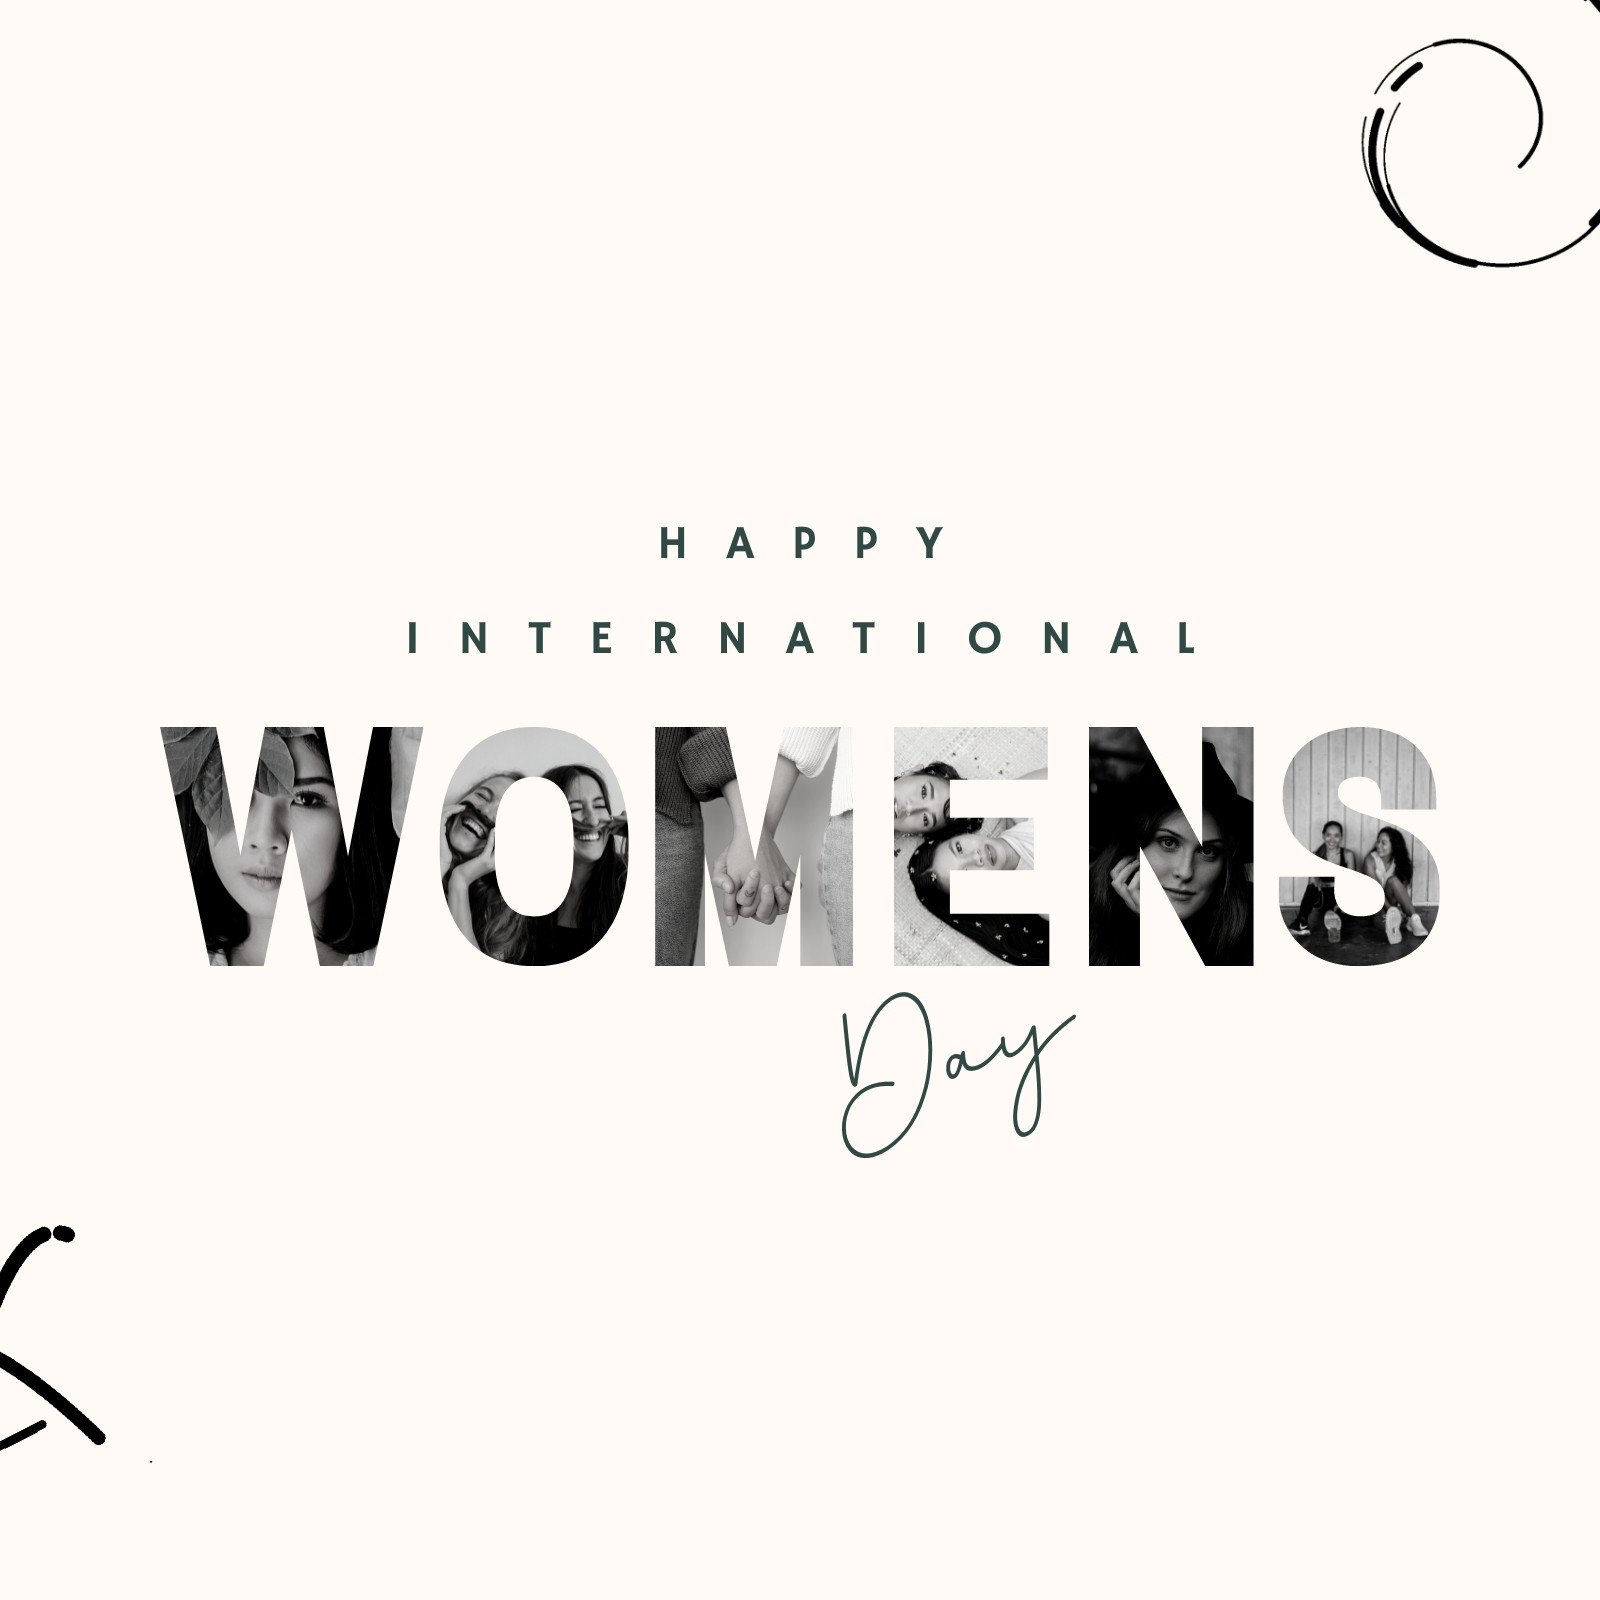 Free Women's Day Instagram post templates to edit